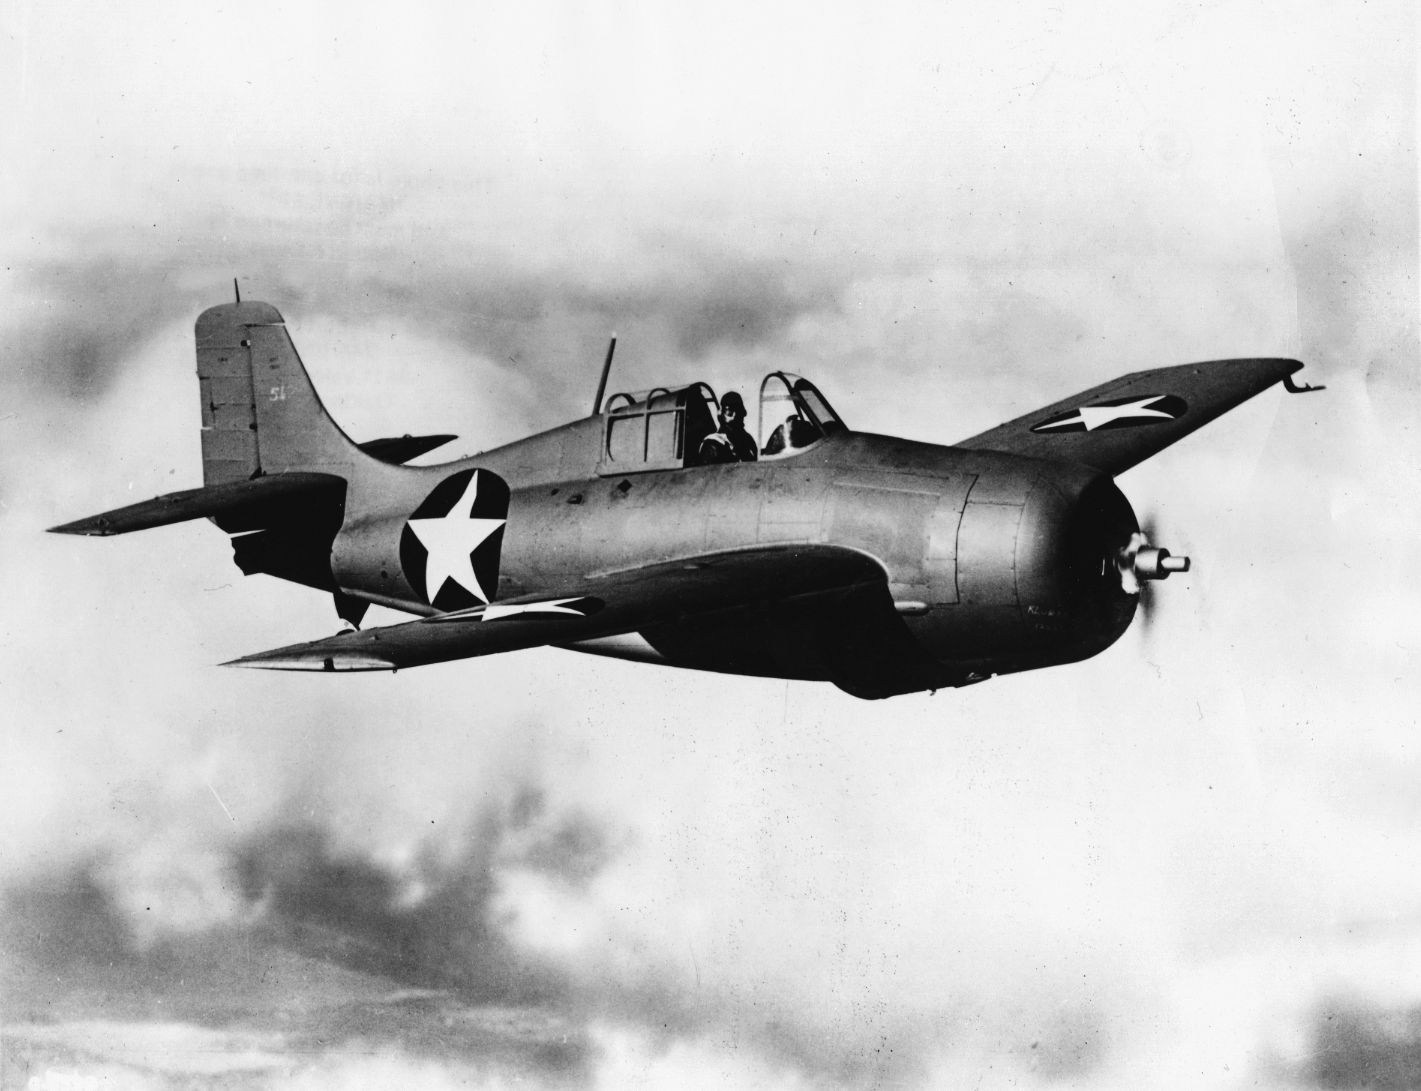 The stubby Wildcat was not a sleek, highly maneuverable aircraft like the Mitsubishi Zero. However, the fighter was a stable gun platform while its armor offered its pilot something the Zero did not—greater survivability. 